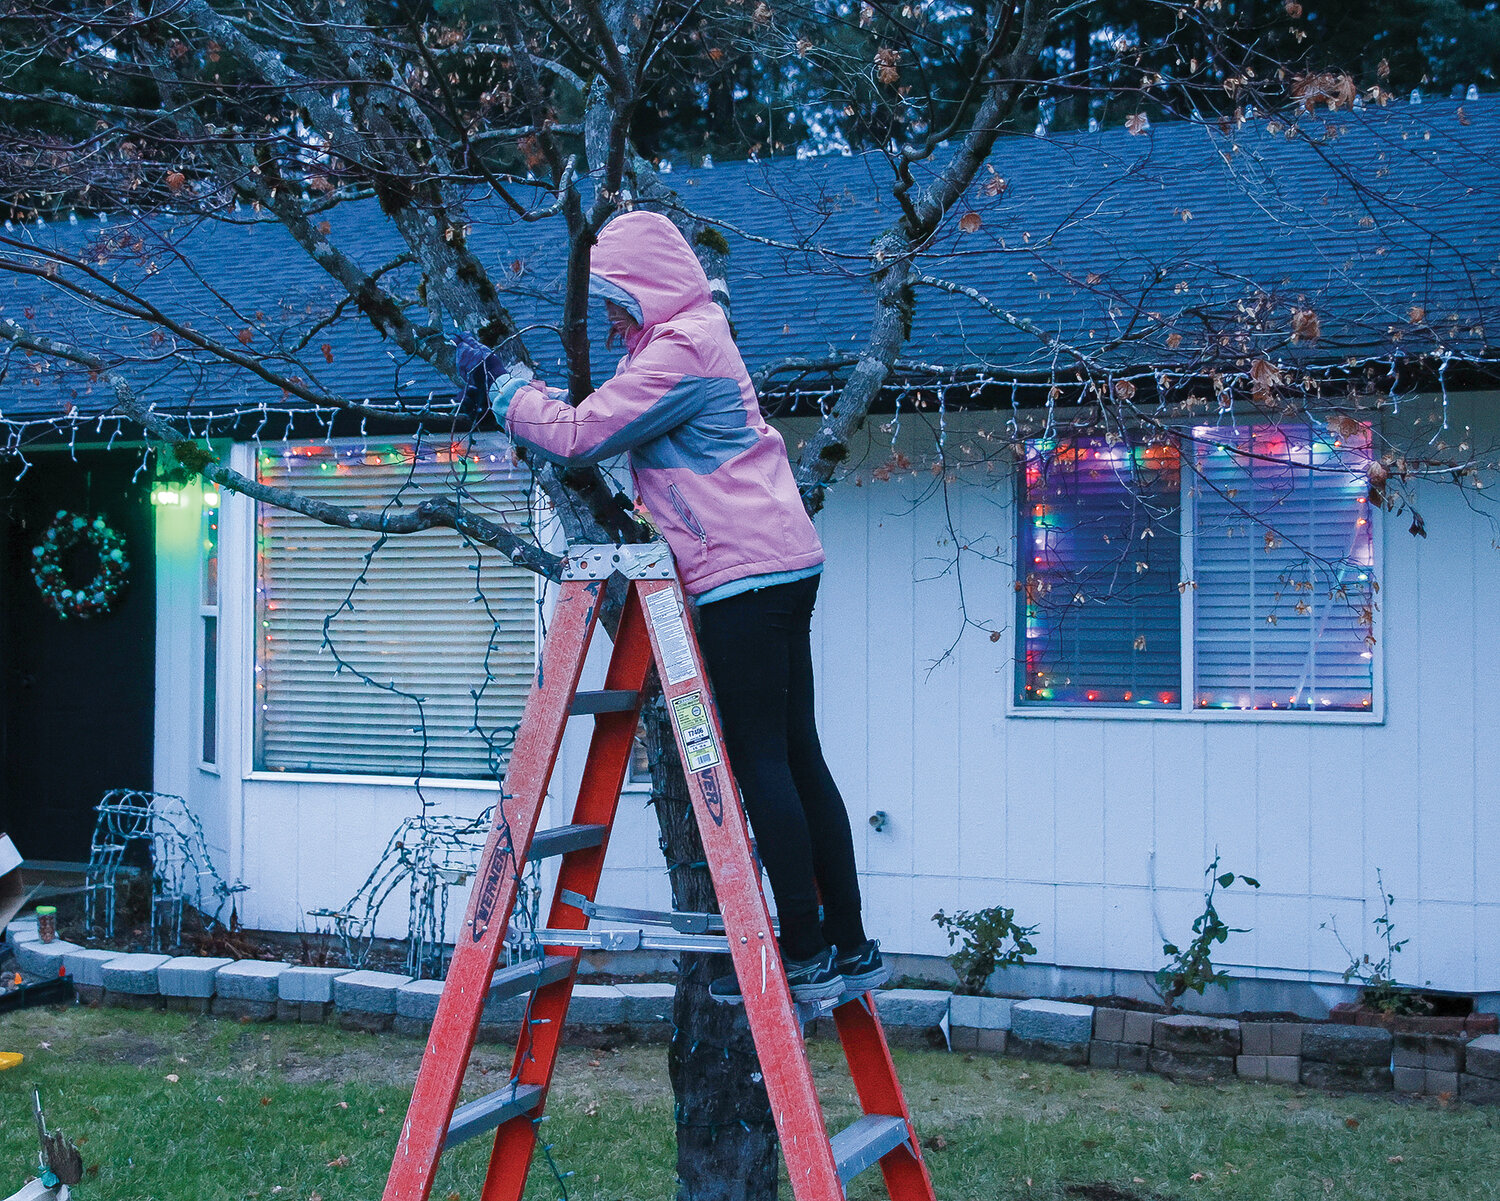 Chloe Schultz hangs lights on a tree in the front yard as the family works together on their Christmas display on Nov. 29.